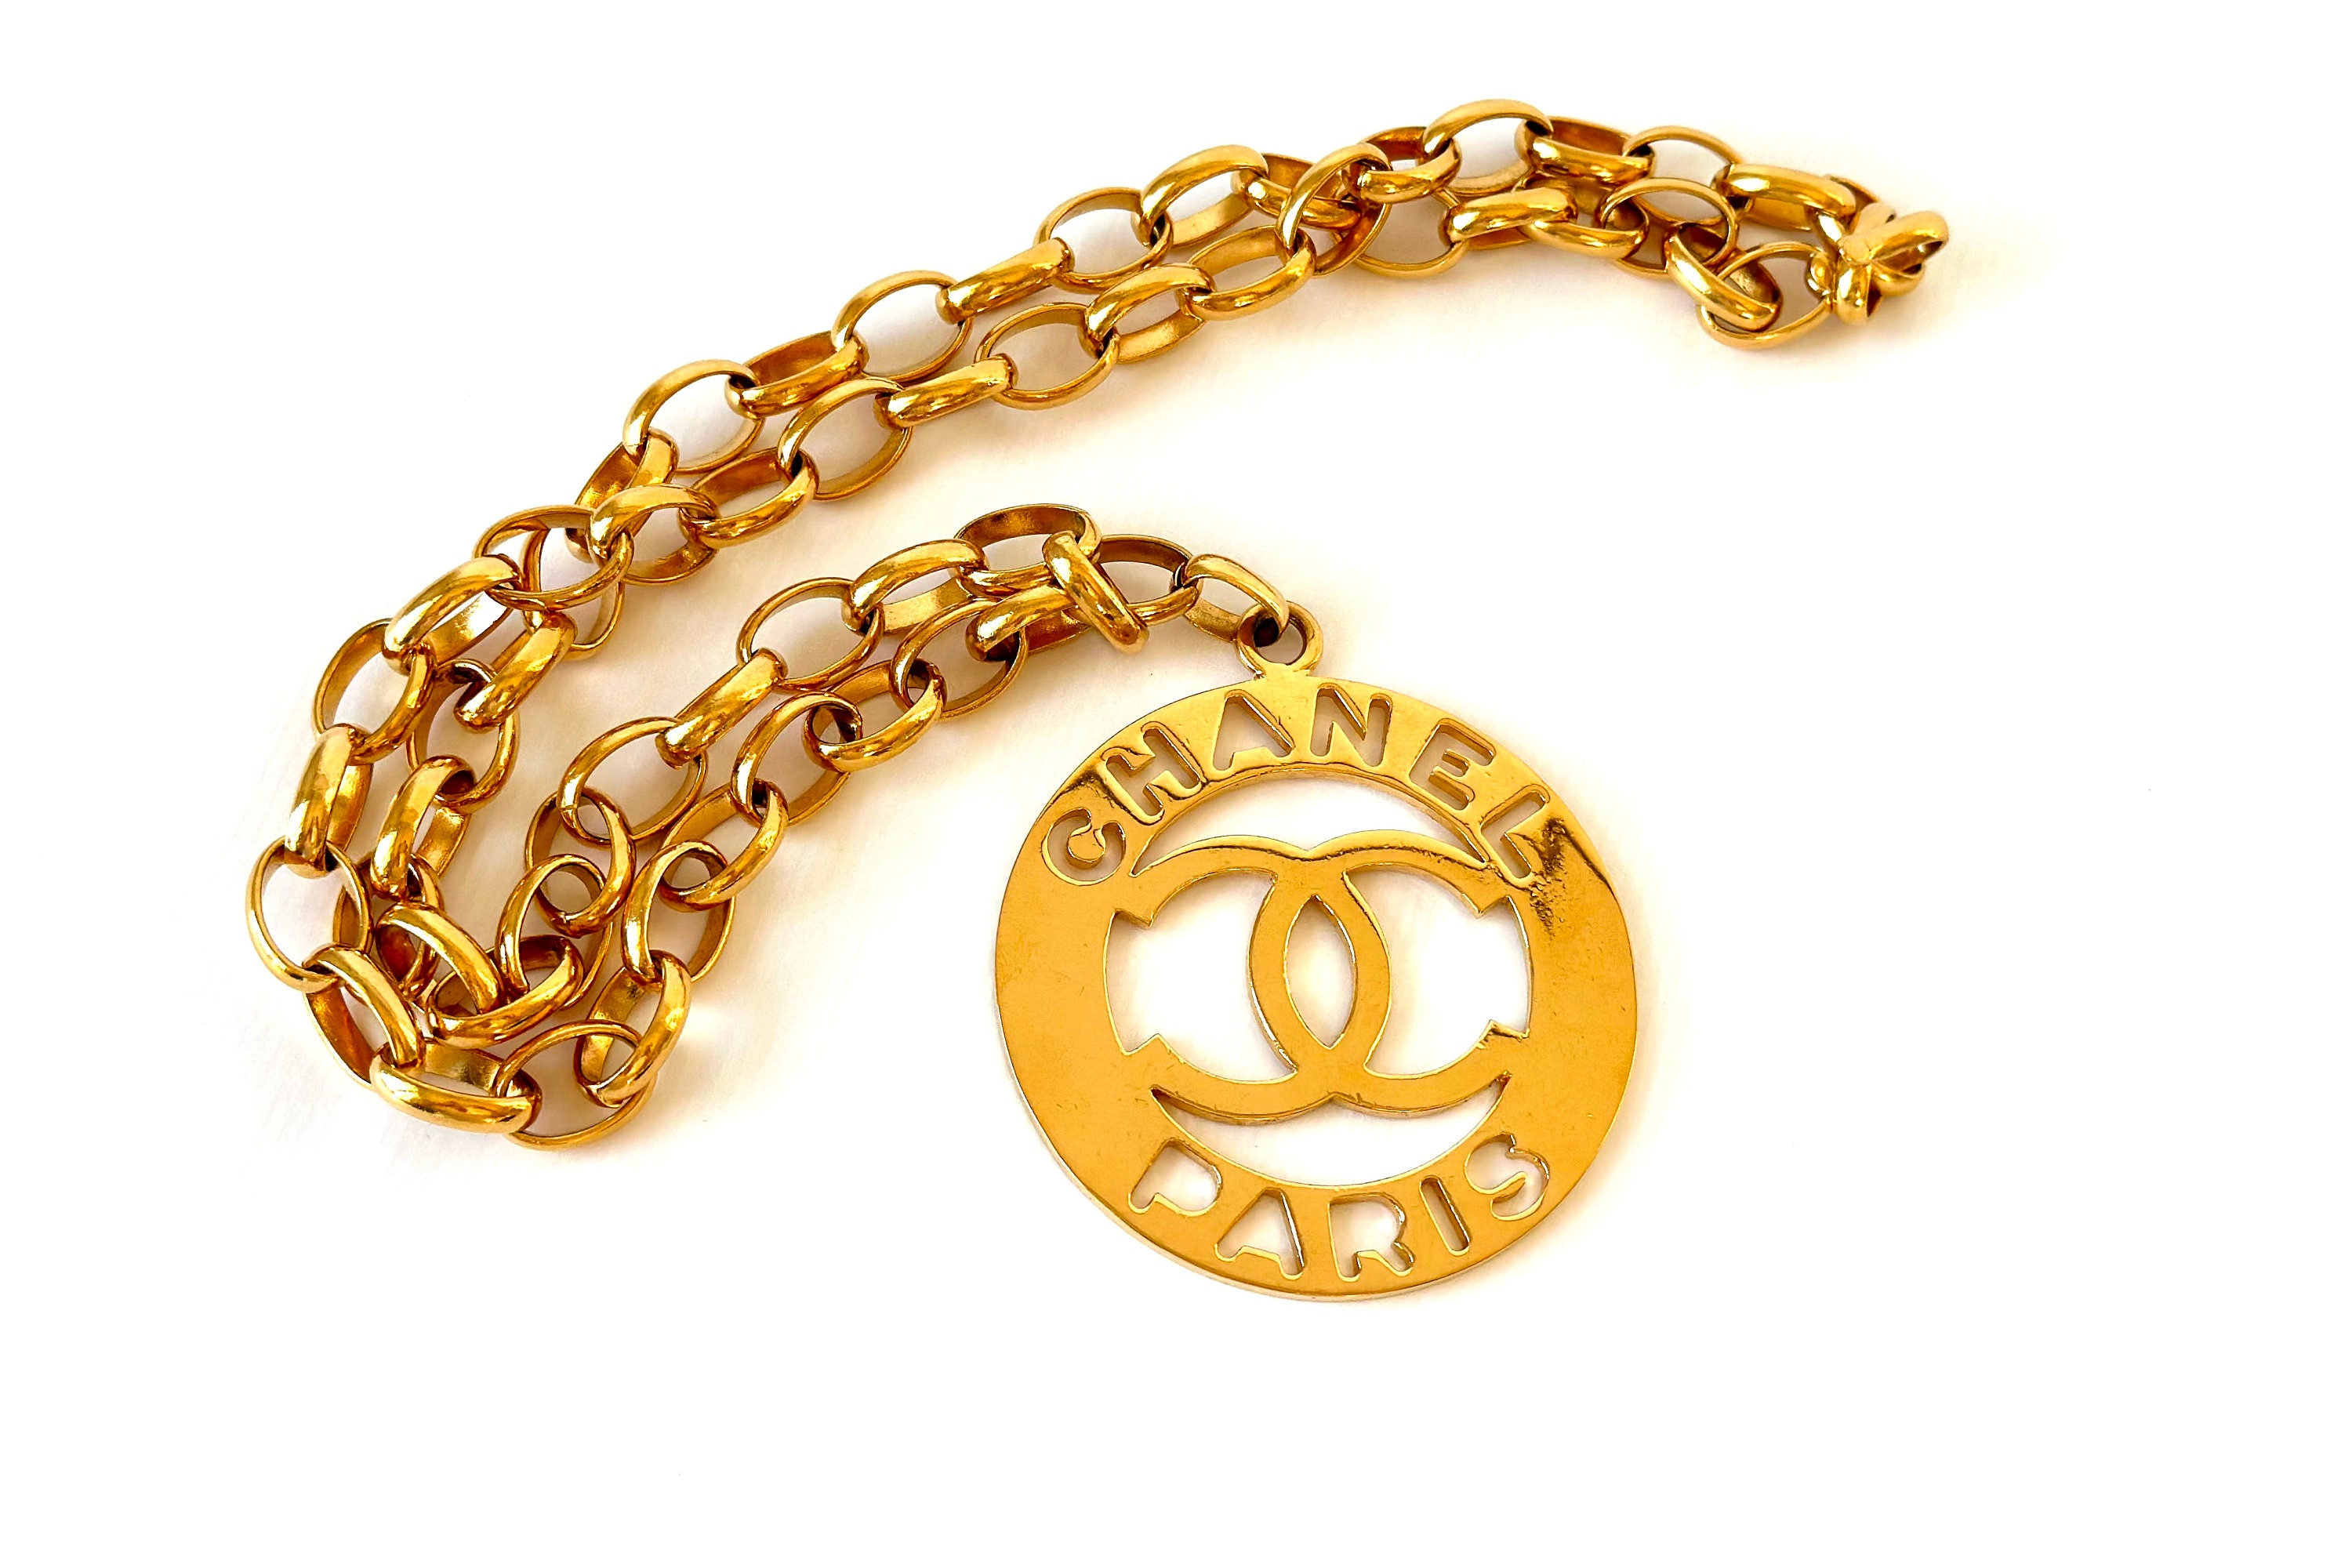 Vintage Chanel Paris Cutout Medallion Chain Belt Gold Plated Made in France  in the 1990s